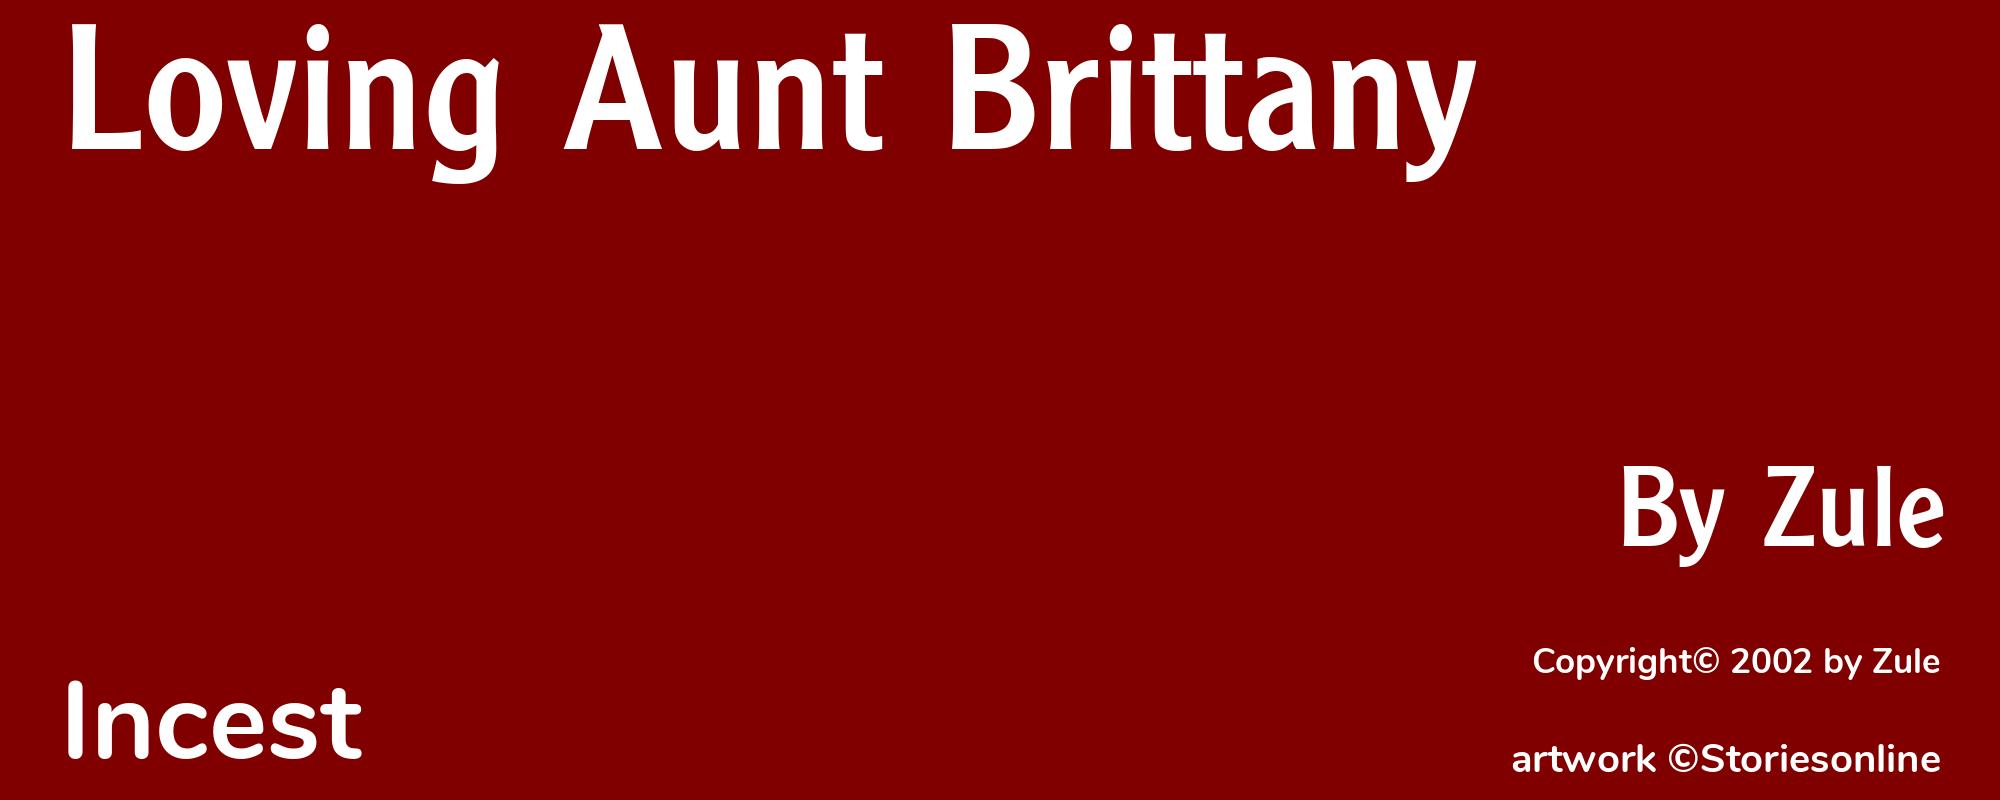 Loving Aunt Brittany - Cover